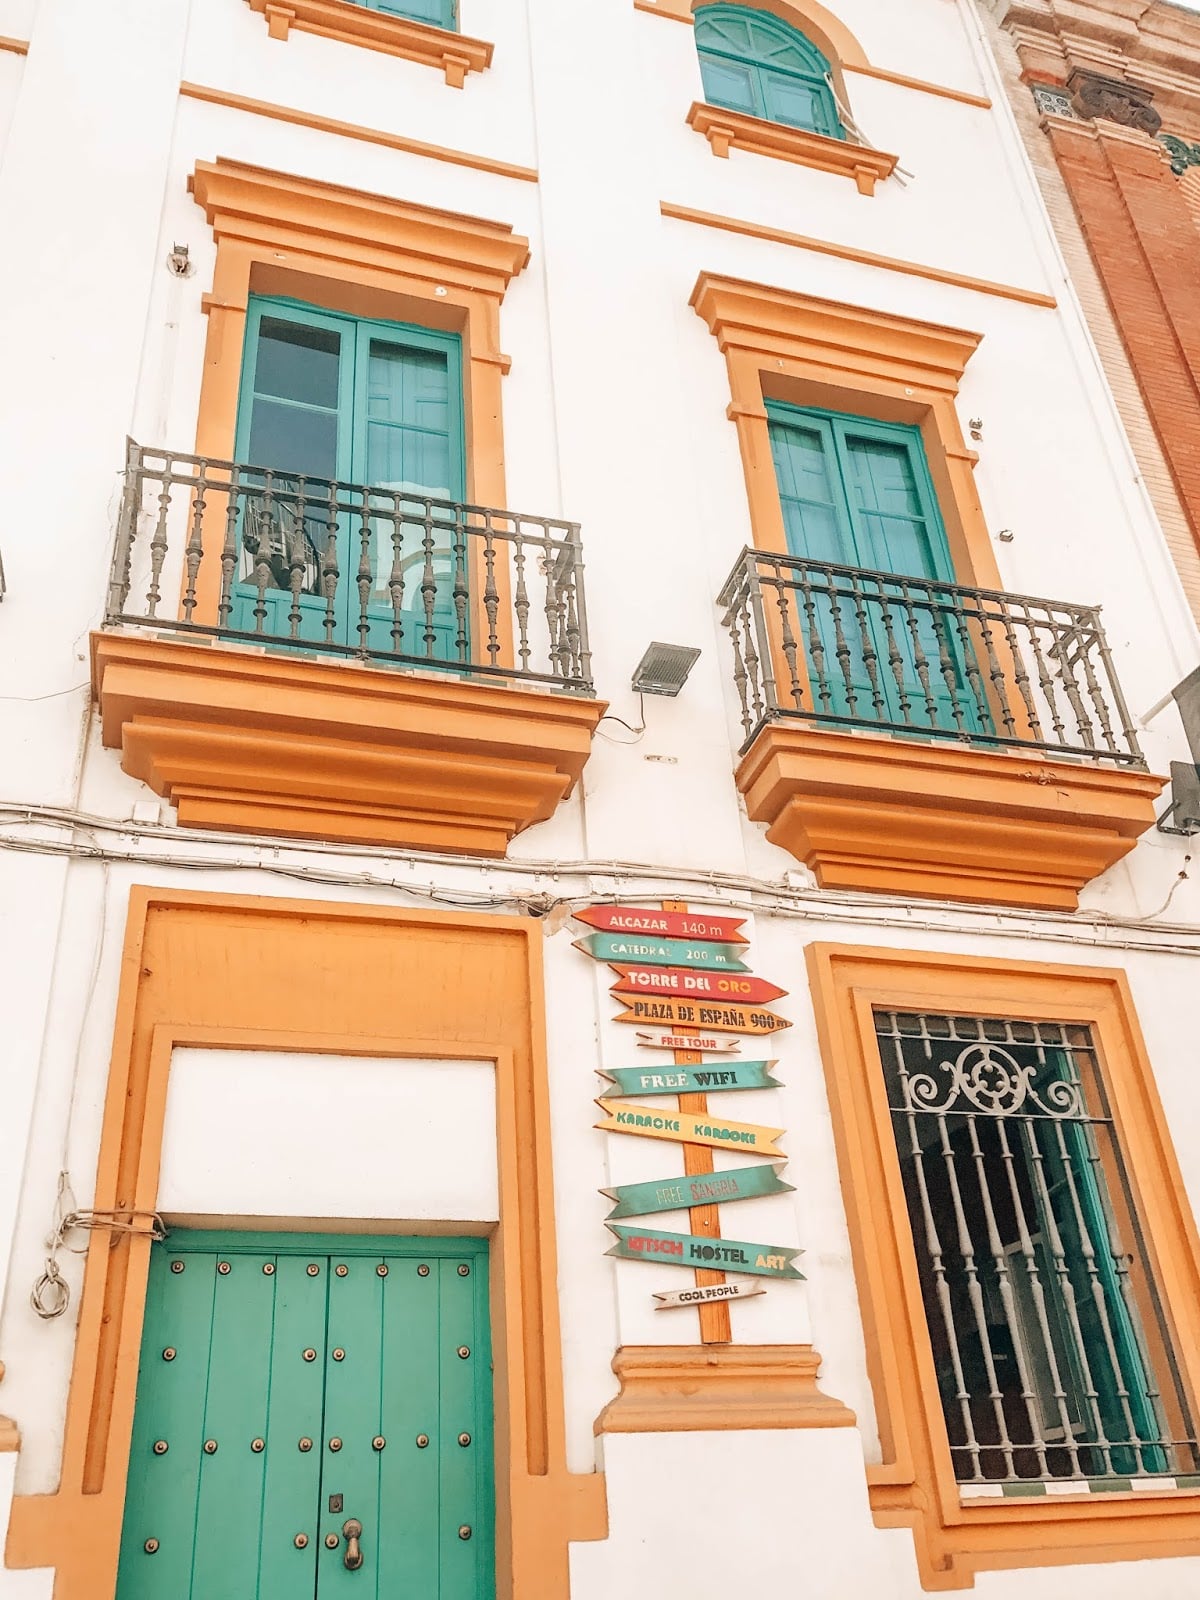 How to Spend 24 Hours in Seville Spain